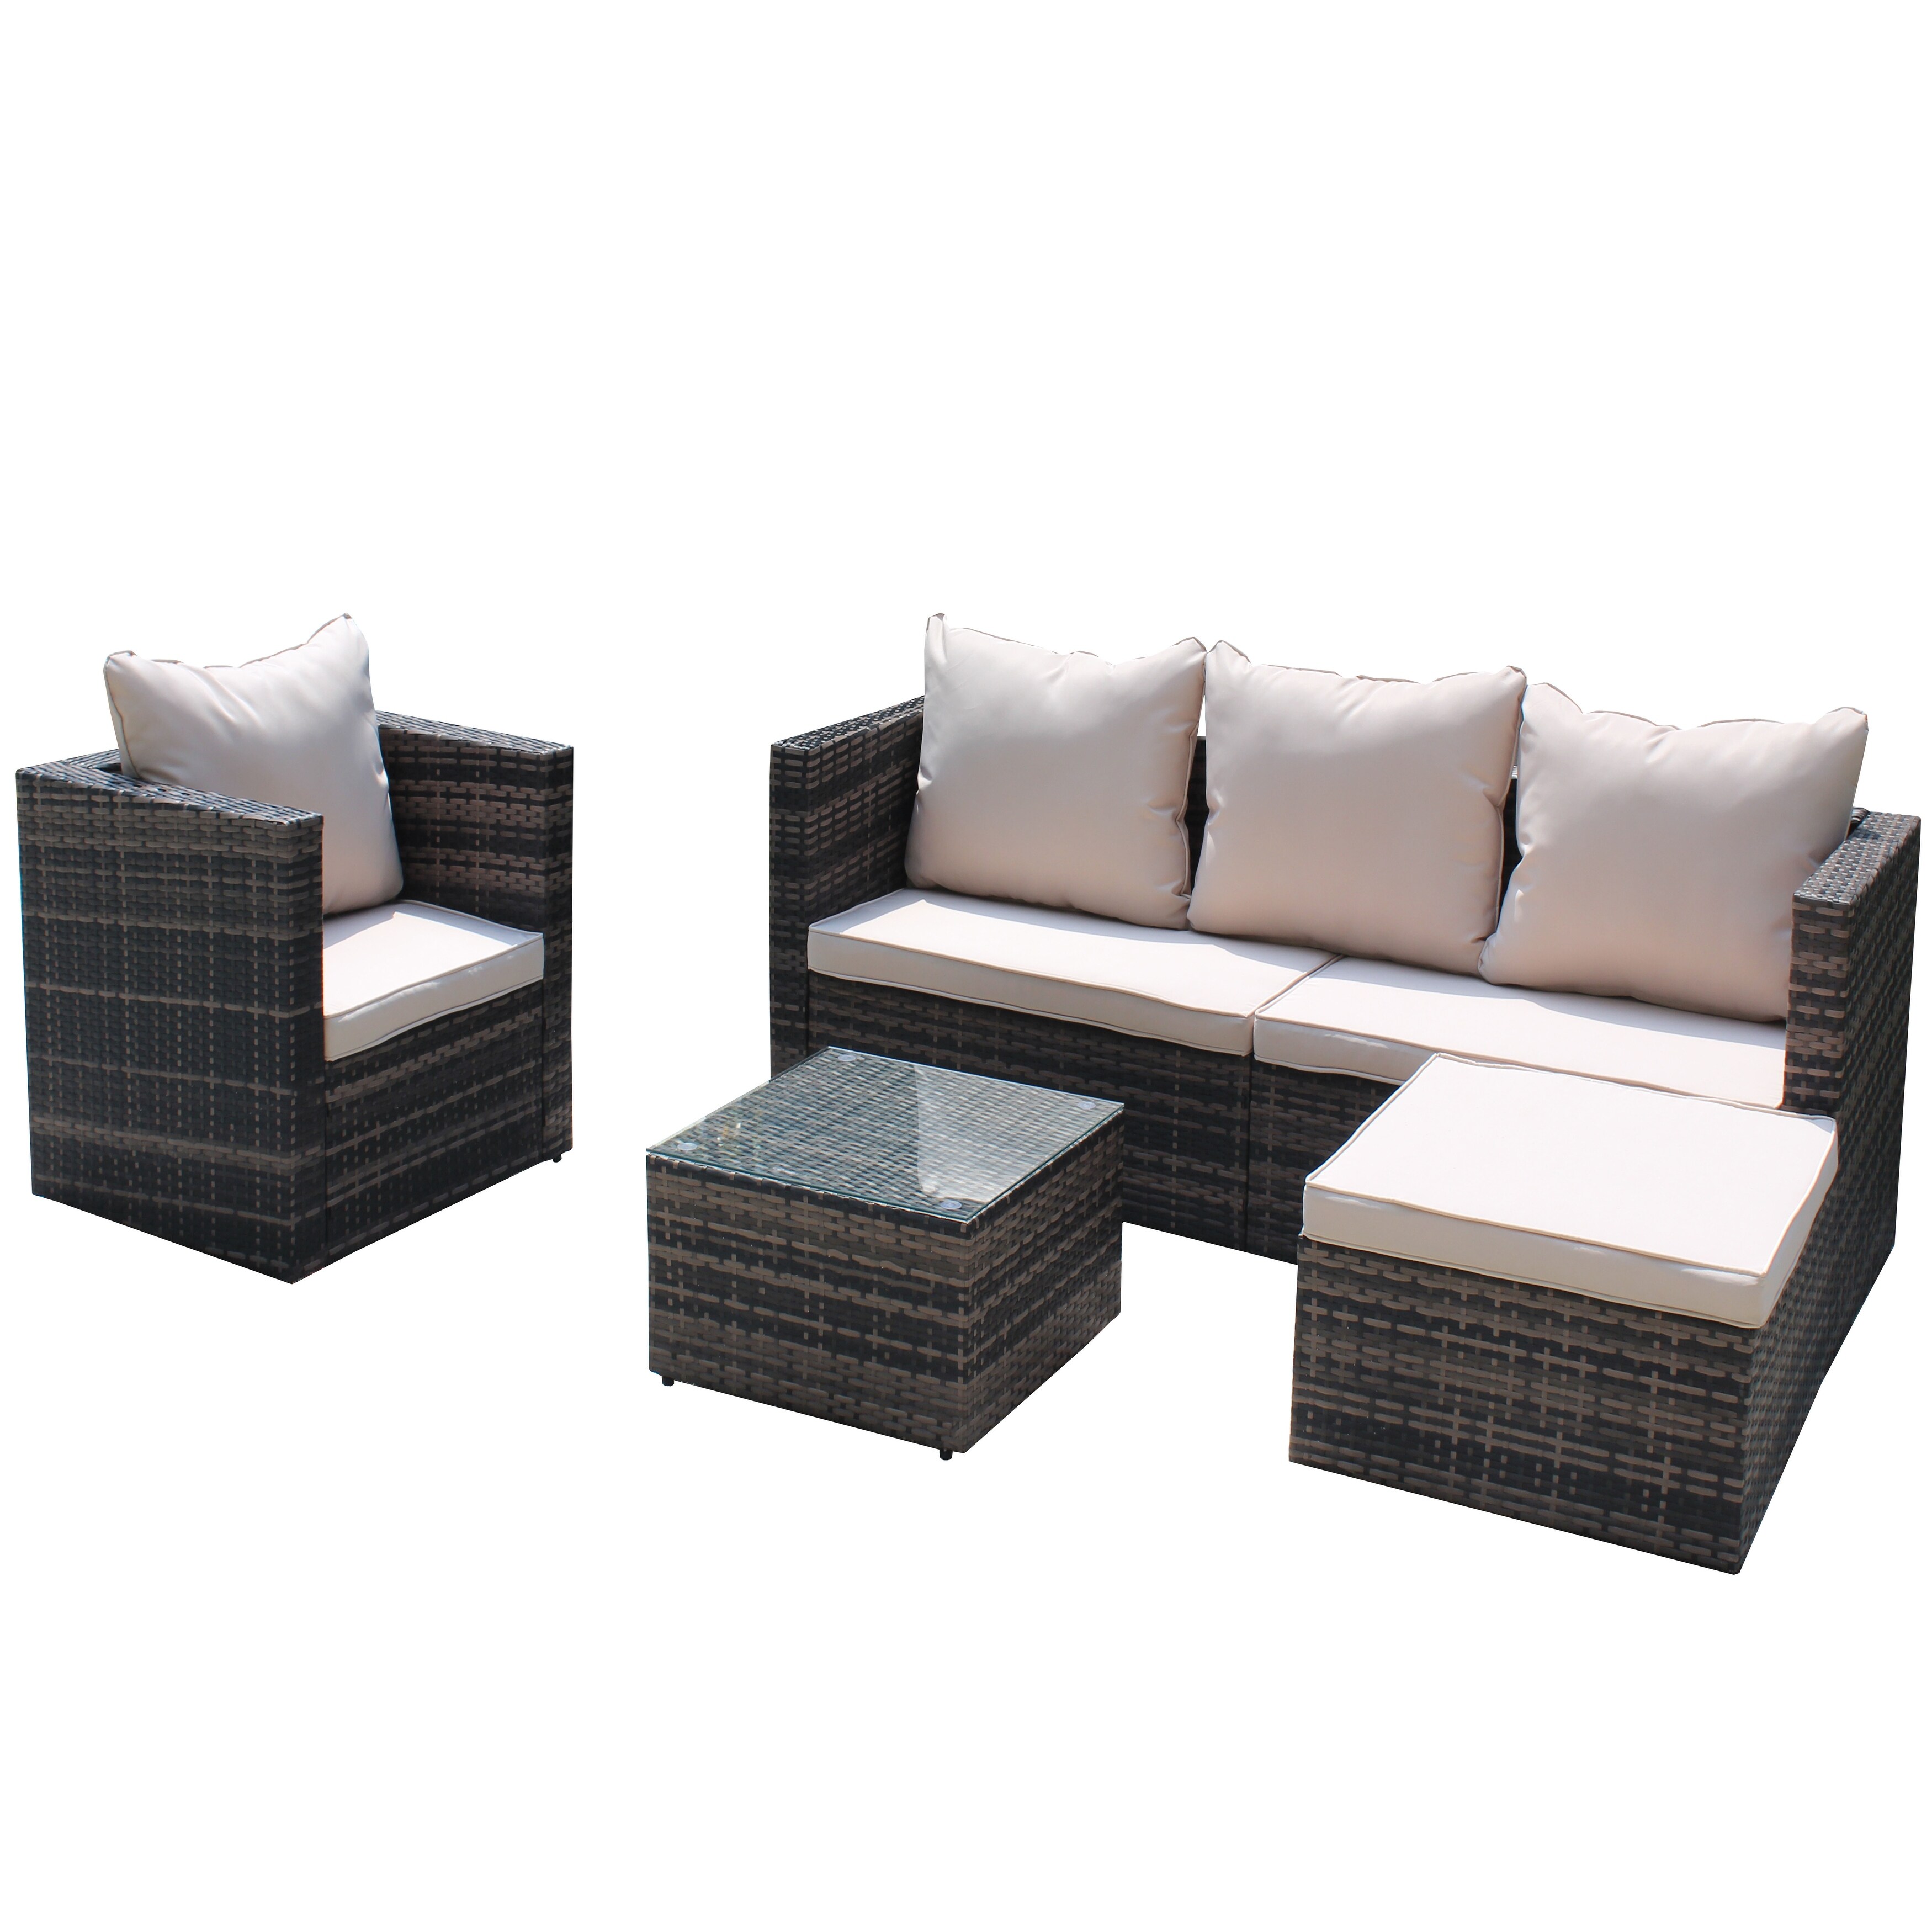 Outdoor Brown Wicker 4 Pieces Furniture Sofa Set With Cushions